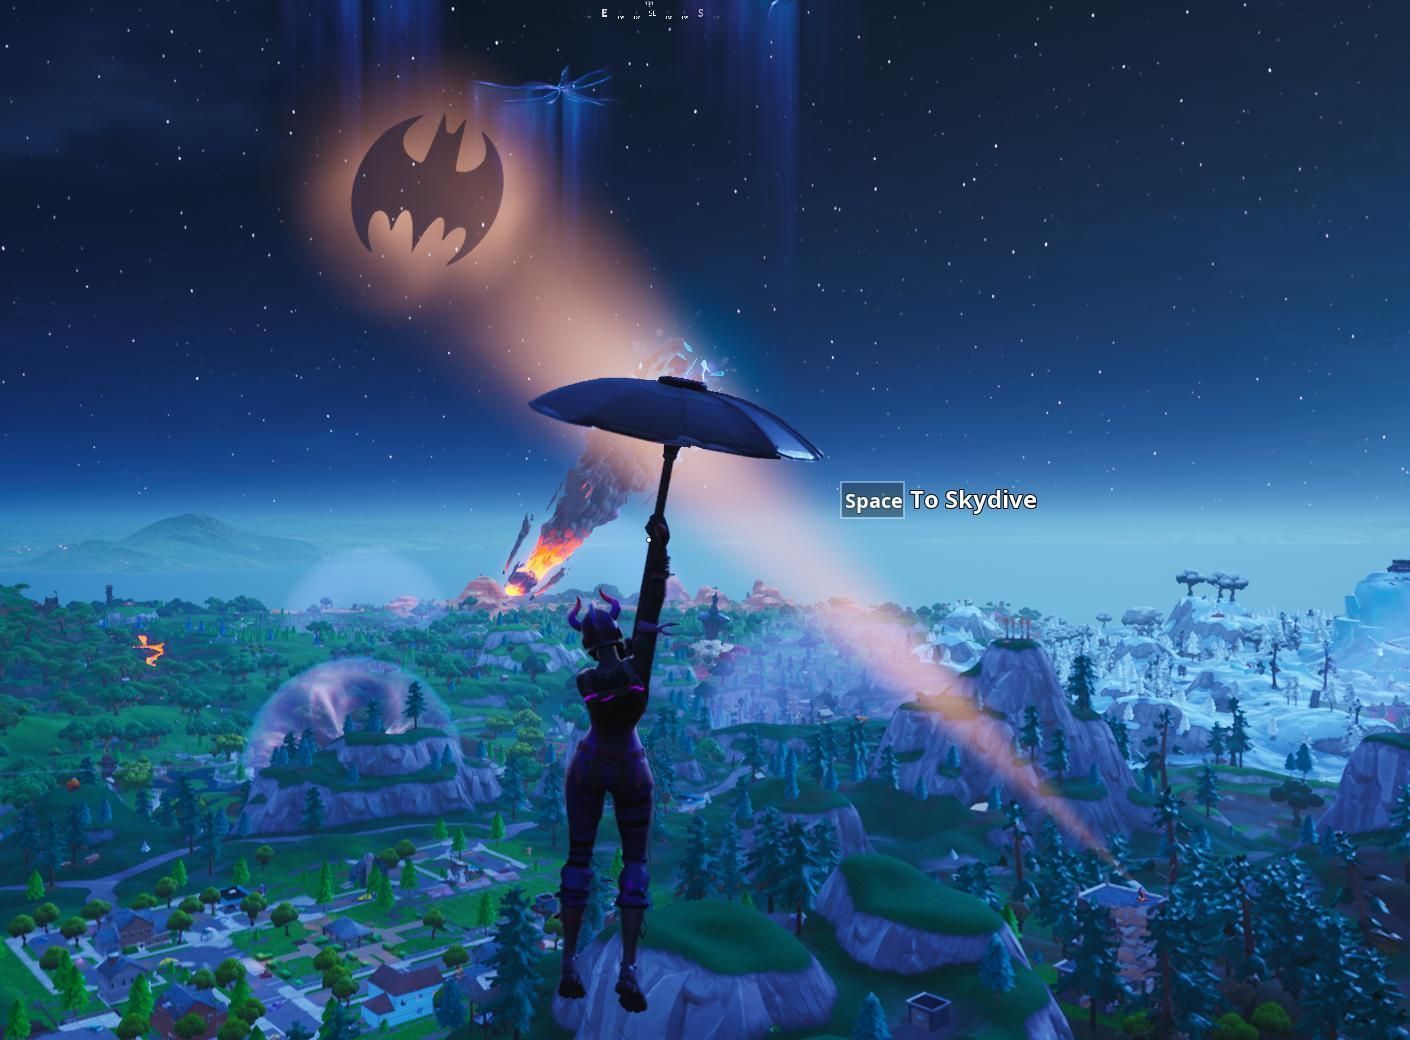 Datamined images suggest Batman is coming to Fortnite | ONE Esports